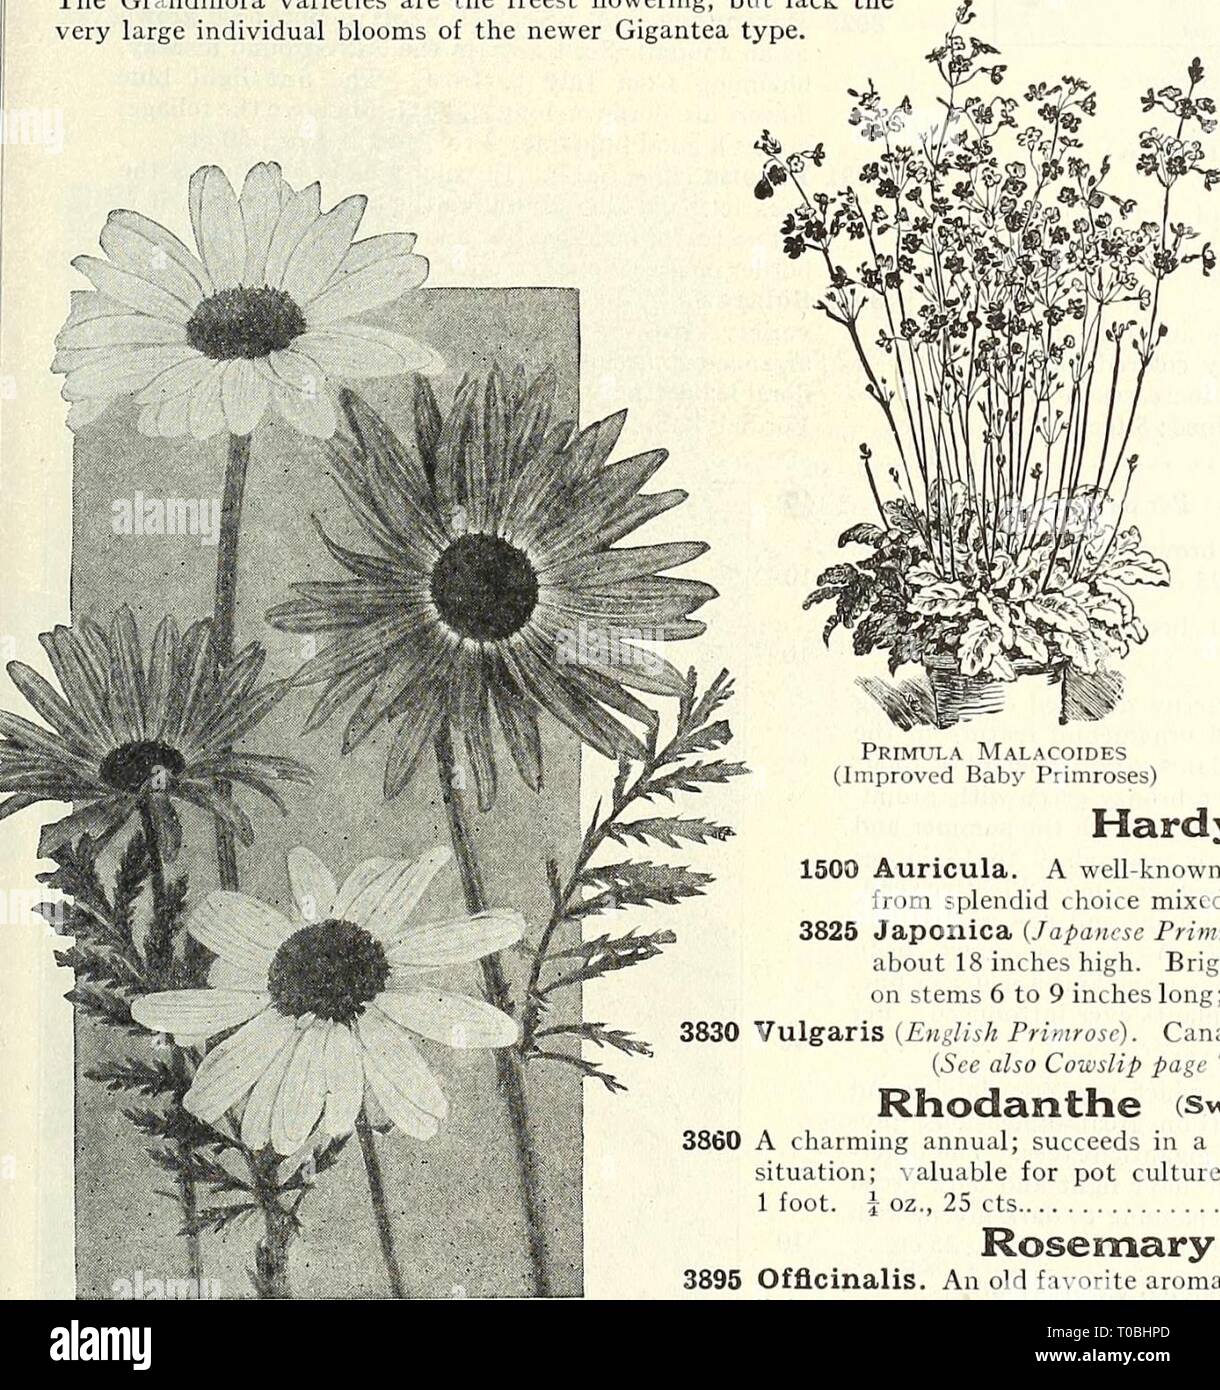 Dreer's garden book 1931 (1931) Dreer's garden book 1931 dreersgardenbook1931henr Year: 1931  Primula Malacoides (Improved Baby Primroses) Dreer's 'Peerless' Chinese Primroses PER PKT. 3811 Obconica Gigantea Ker- mesina. Rich crimson $0 25 3812 Rosea. Pure rose color 25 3815 Mixed. All colors 20 3816 -Grandiflora Alba. Pure white 20 3817 Kermesina. Bright crimson 20 3818 Rosea. Beautiful clear ruse 20 3819 Appleblossom. Soft pink 20 3820 Mixed. All colors 15 Various Primroses 3824 Kewensis. This variety is most attractive, with pleasing bright yellow flowers borne on long stems. It is delightf Stock Photo